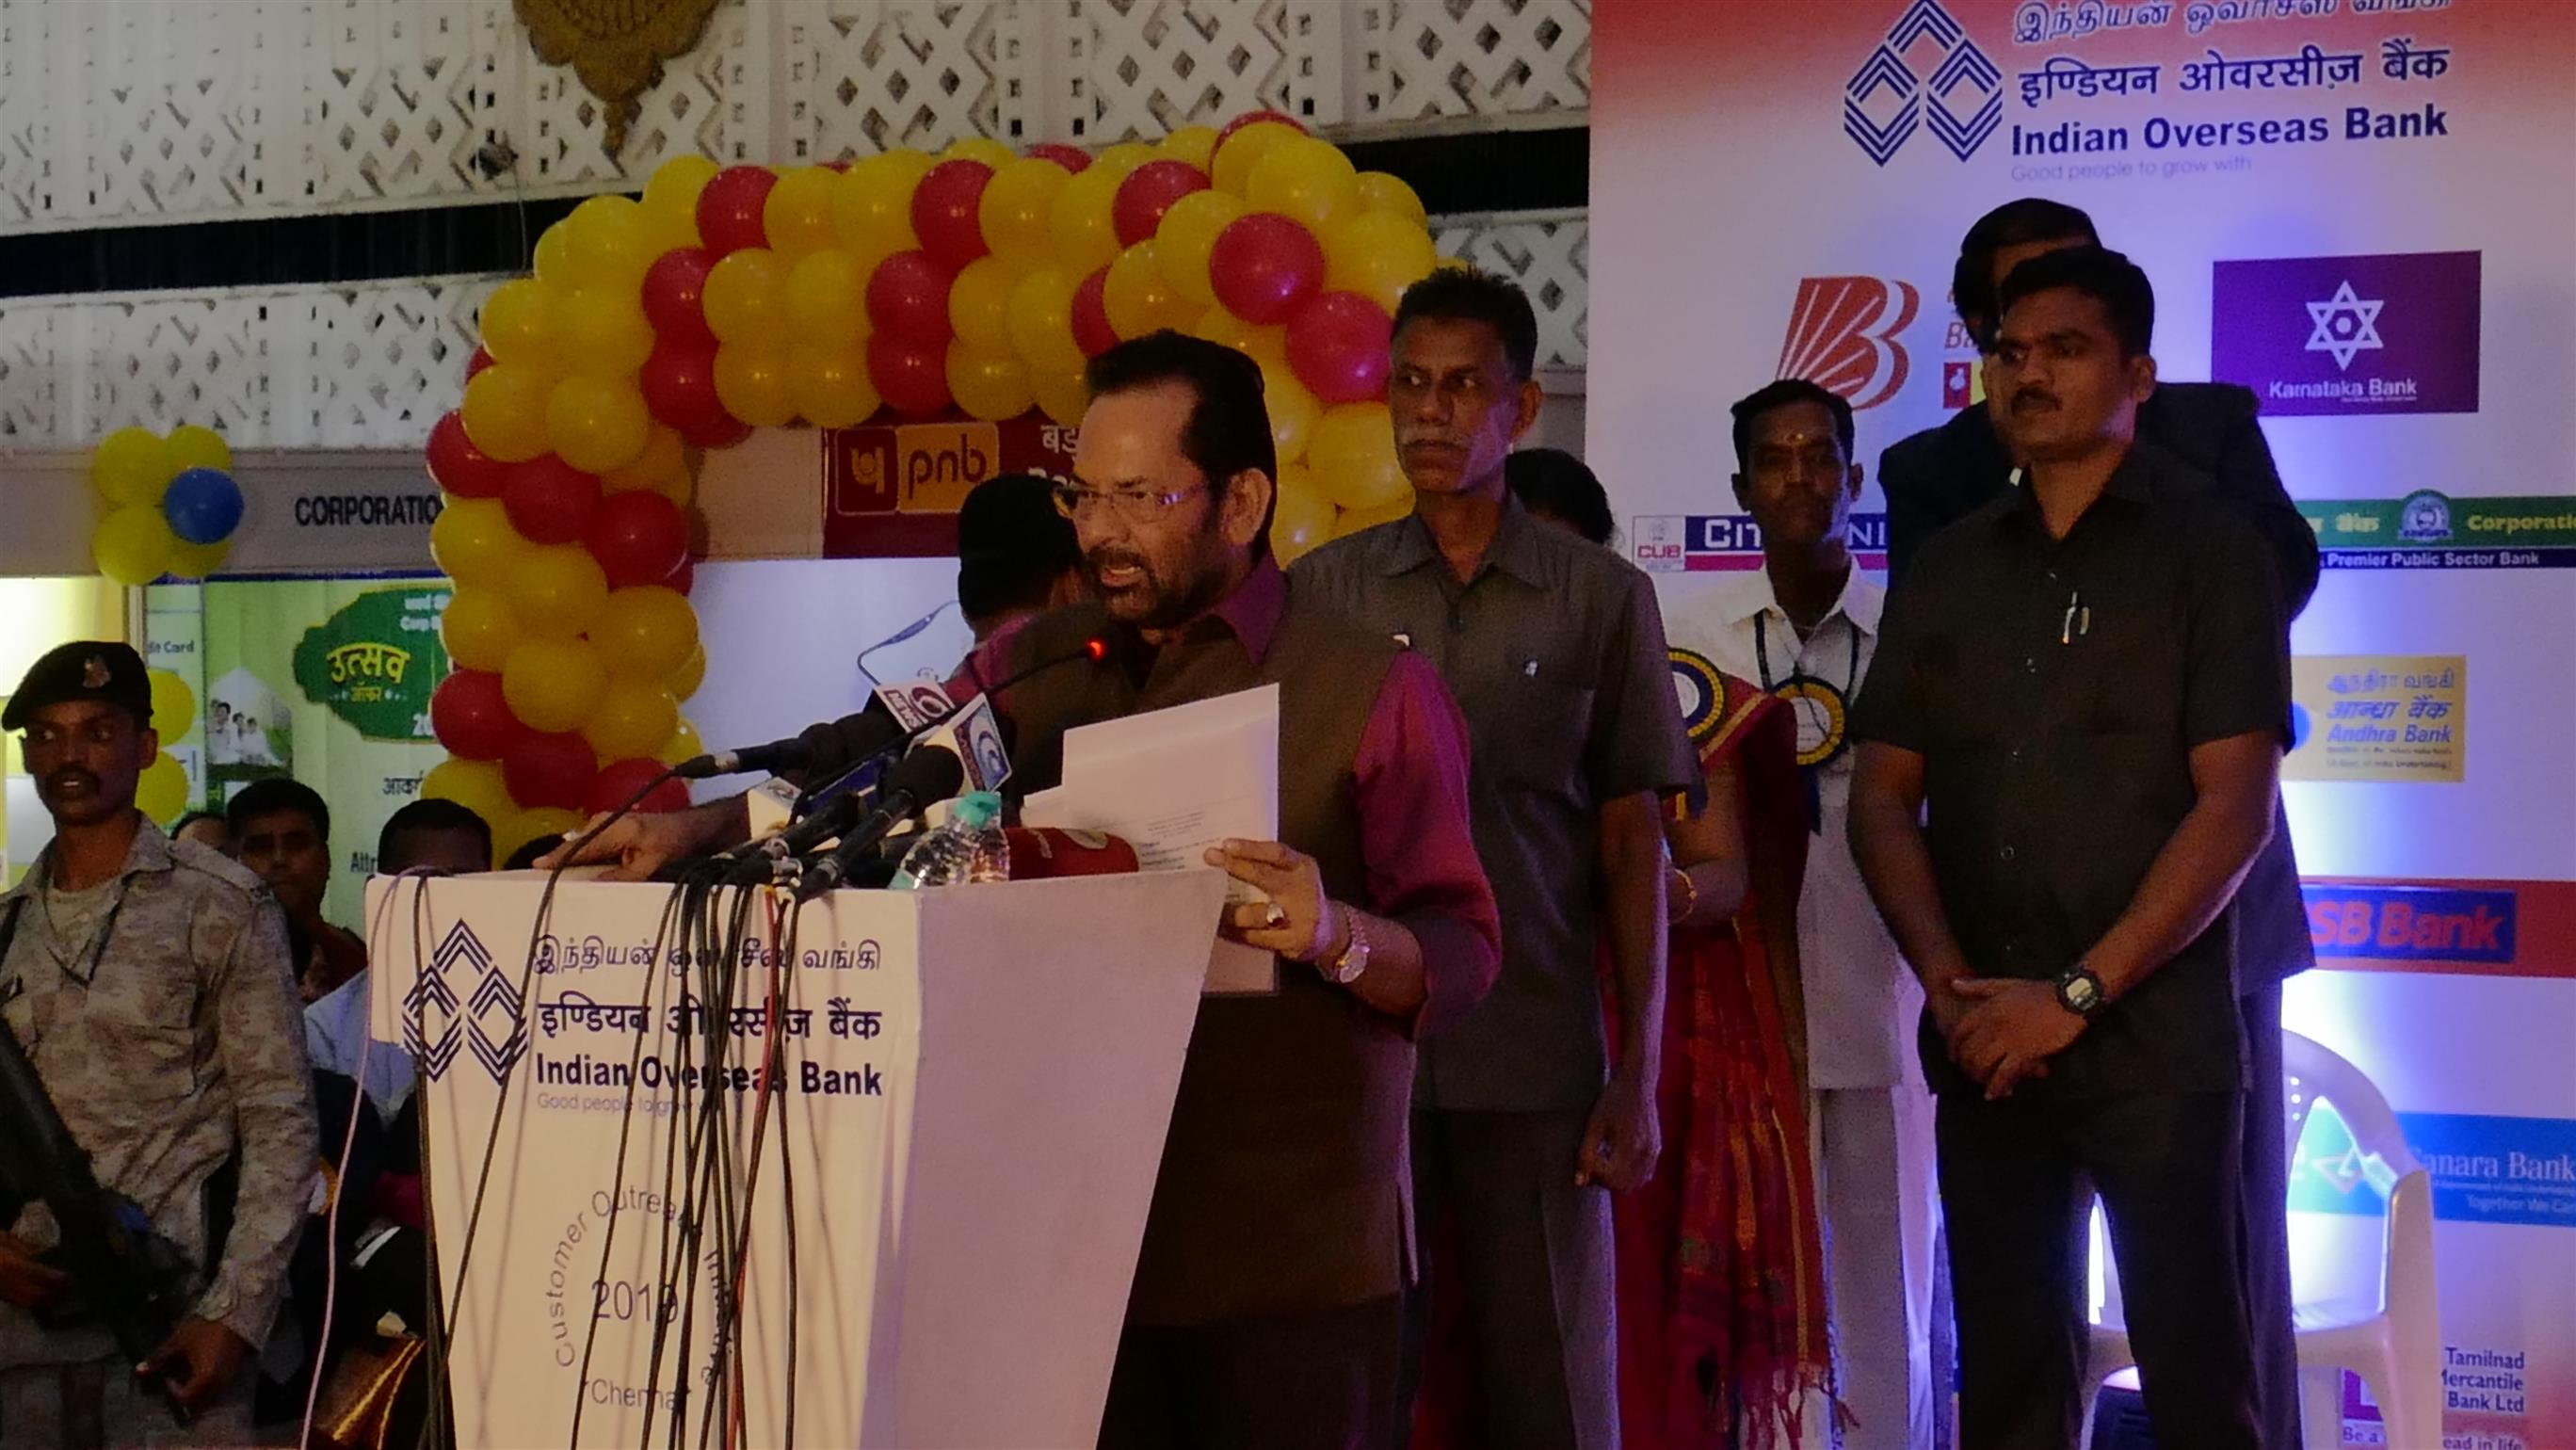 Shri. Mukhtar Abbas Naqvi, Union Minister for Minority Affairs presenting the offer letter to the beneficiaries at the Customers Outreach Initiative Programme organised by the Indian Overseas Bank, today, at Chennai. (October 5, 2019)